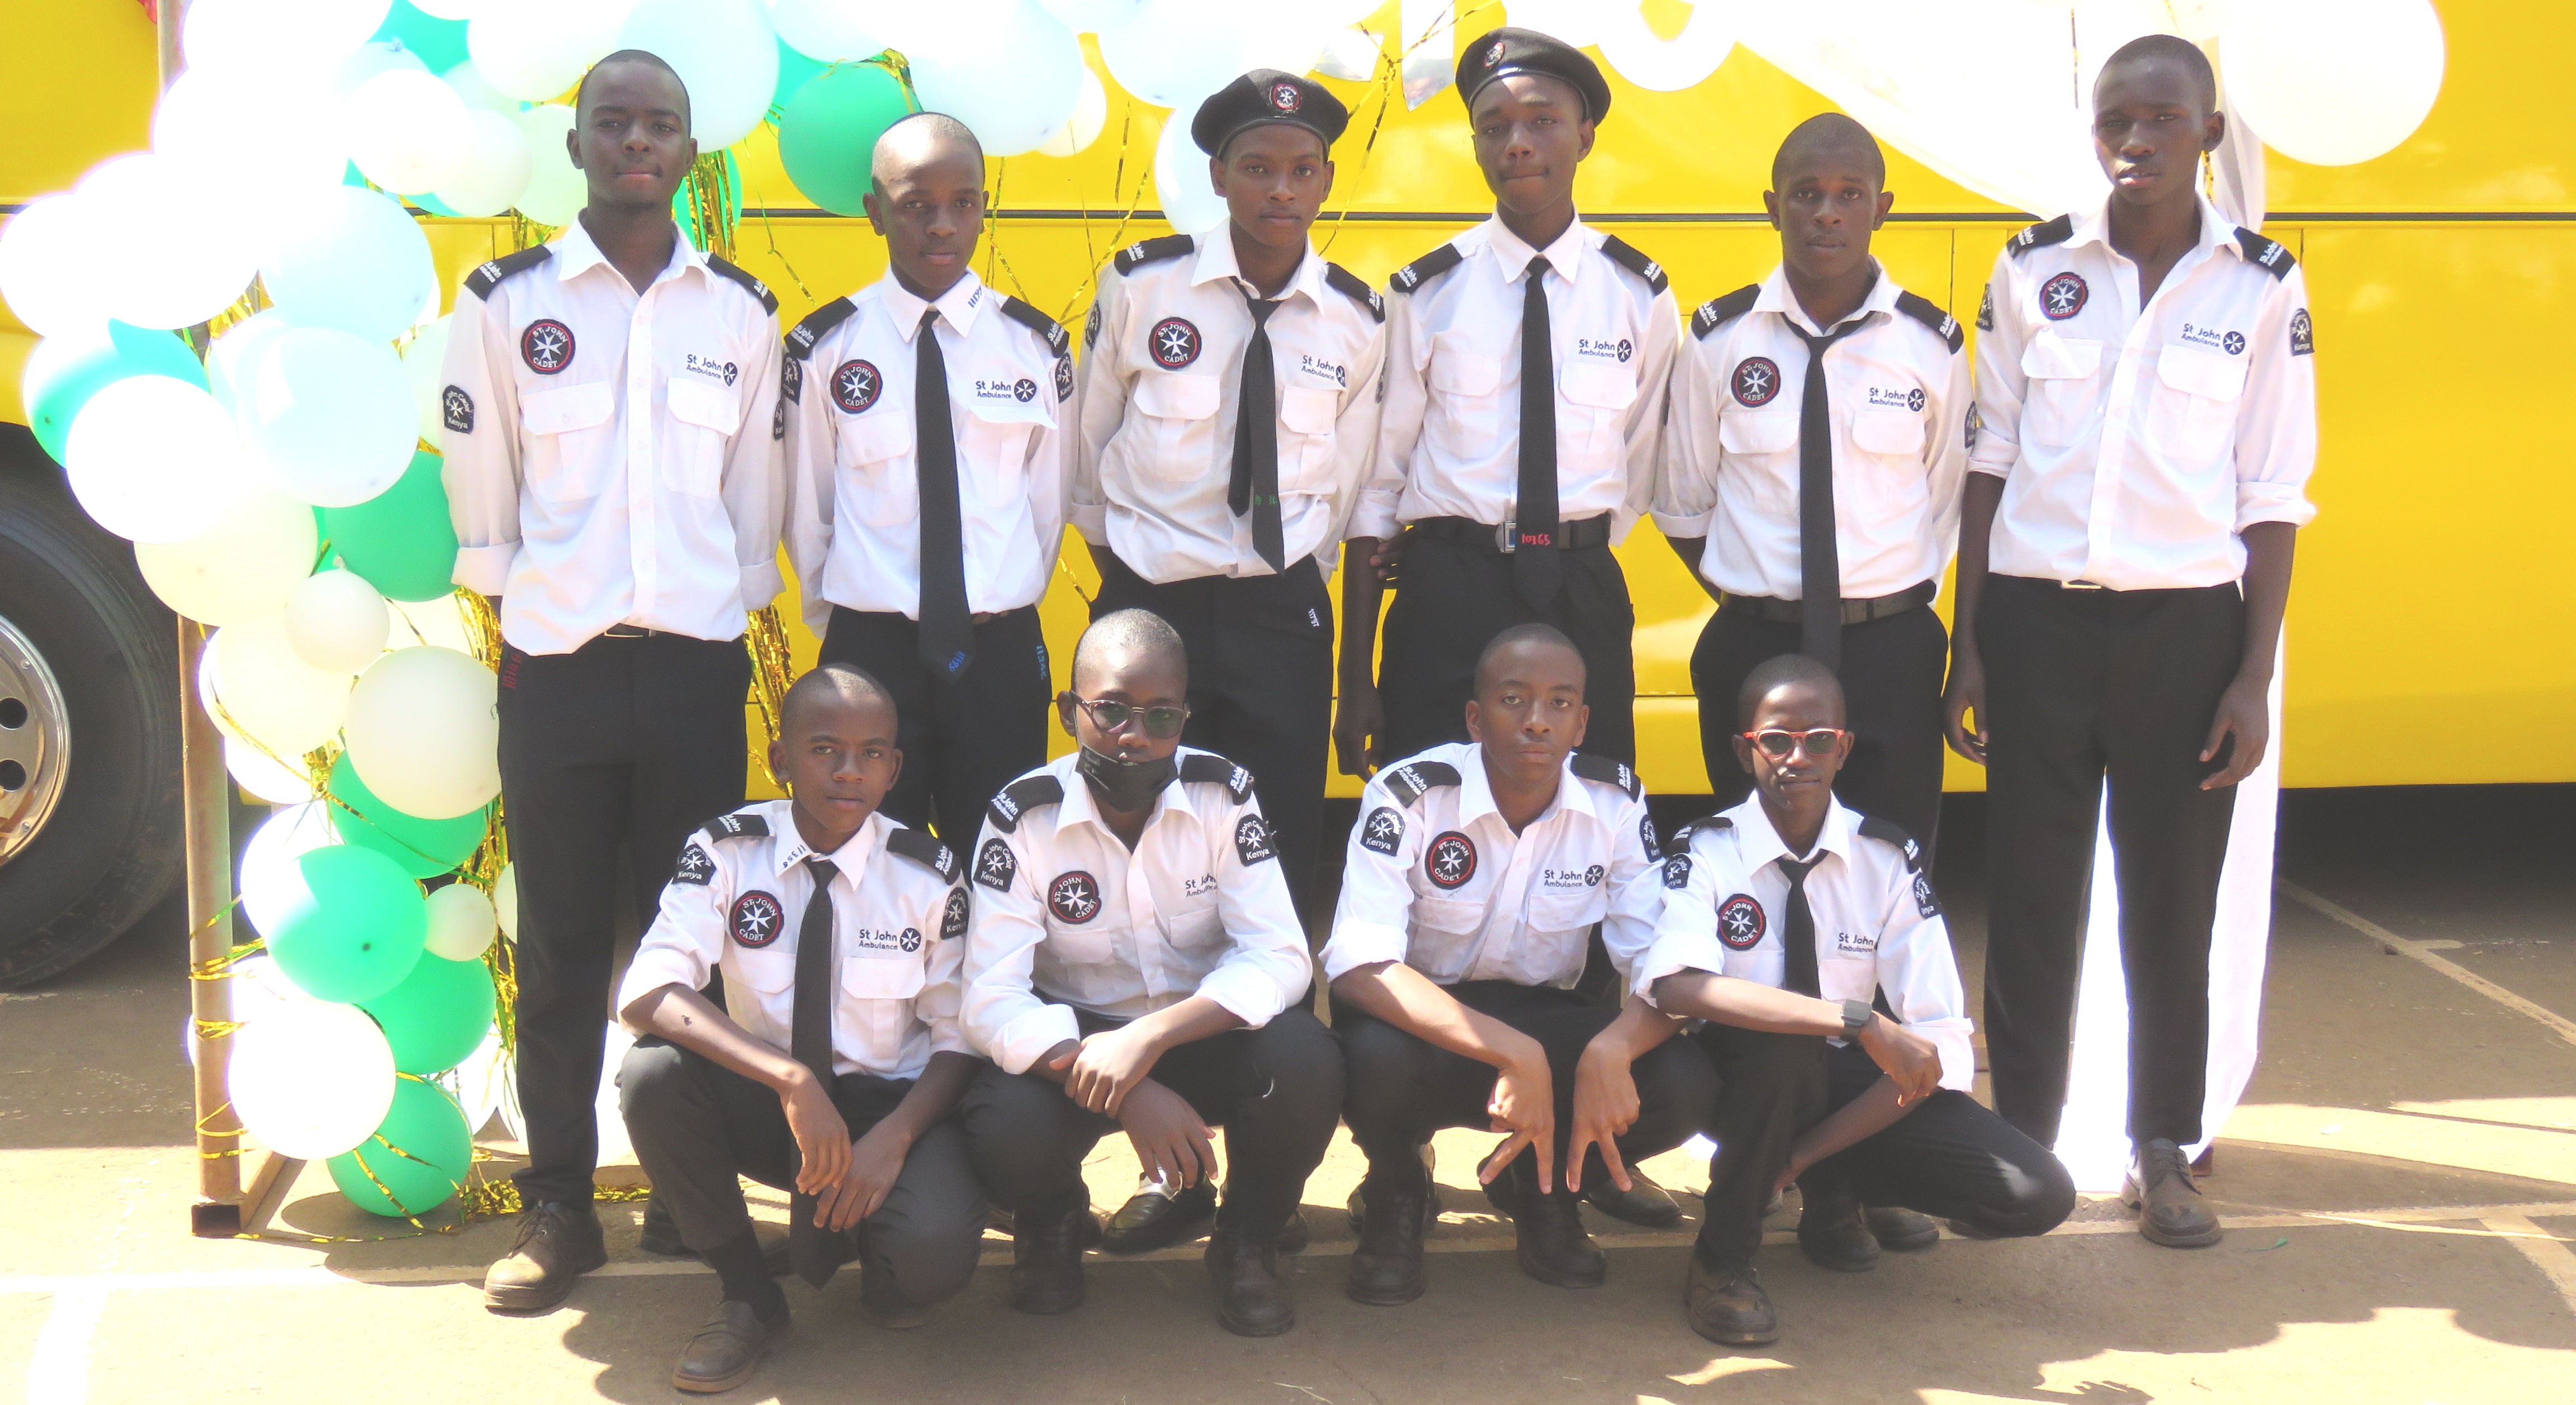 The St John Ambulance Club in the school trains students in disaster preparedness, firefighting, and first aid. The training has helped the student community to get the skills they need to help their friends and the entire school members in cases where these skills and training are required.